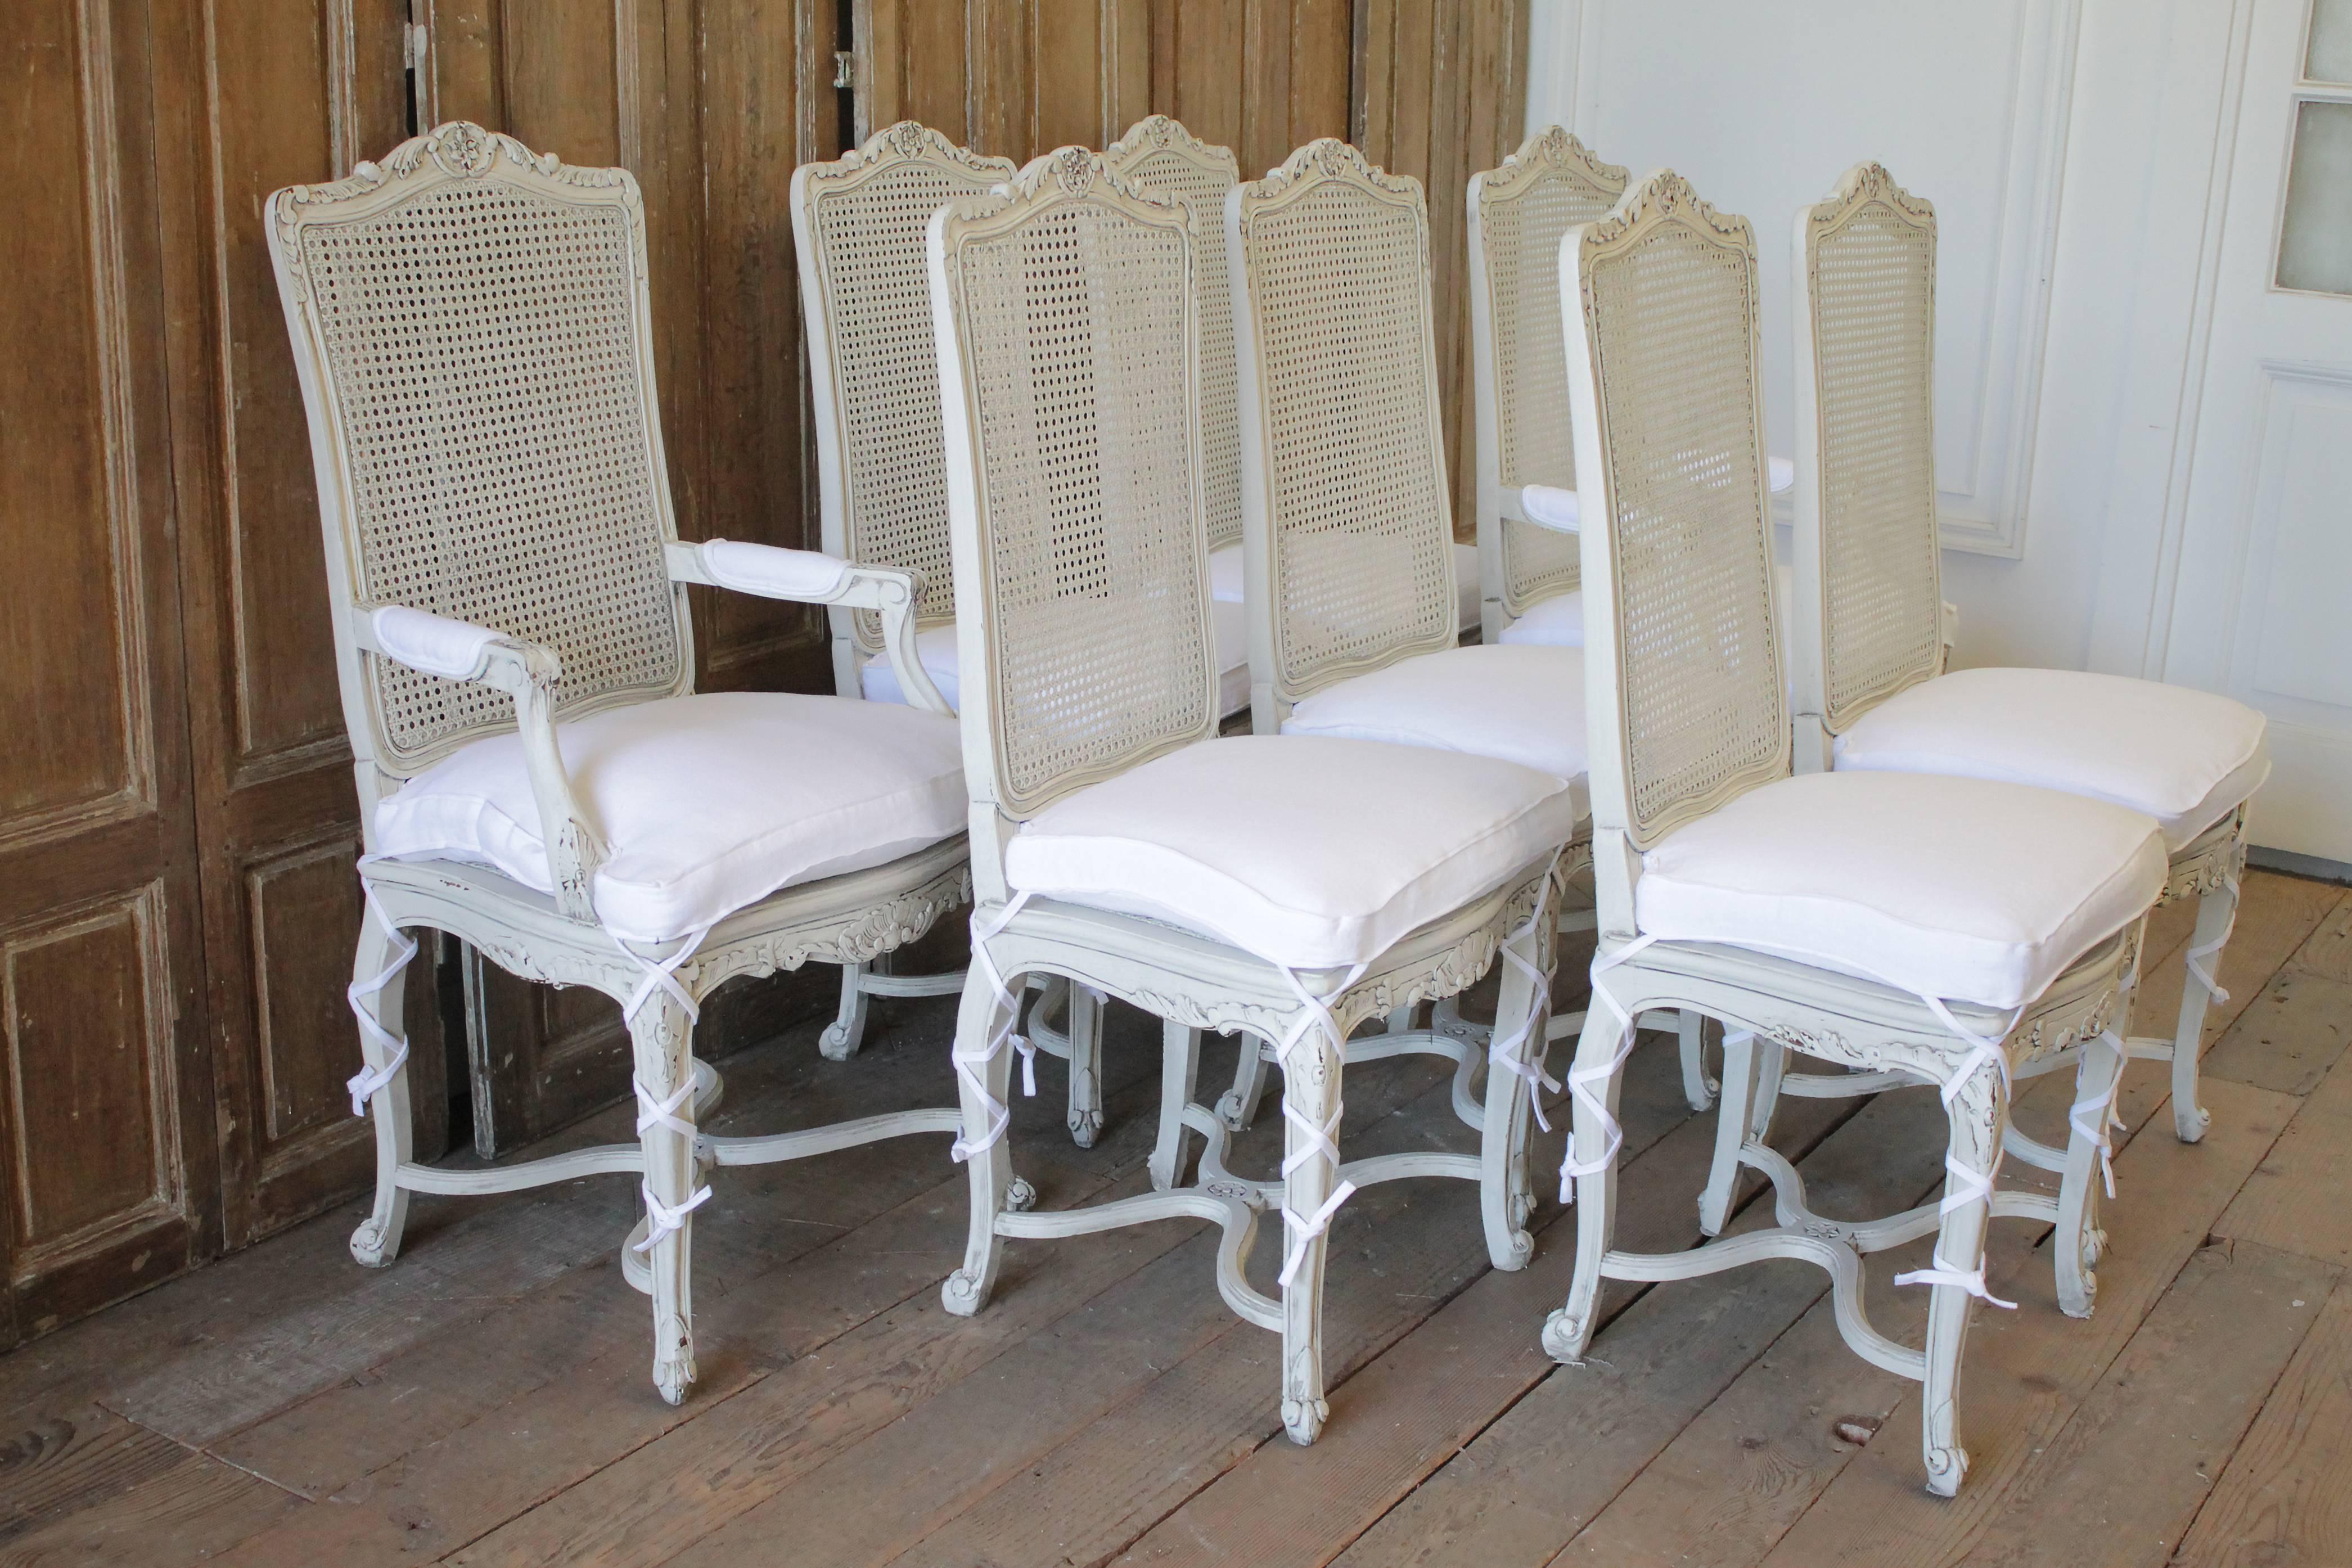 20th century painted Louis XV style cane back dining chairs with linen cushions
Freshly painted in a soft white with subtle distressed edges, and finished with a hand applied antique glaze to give the look of a time worn patina. Cane is good